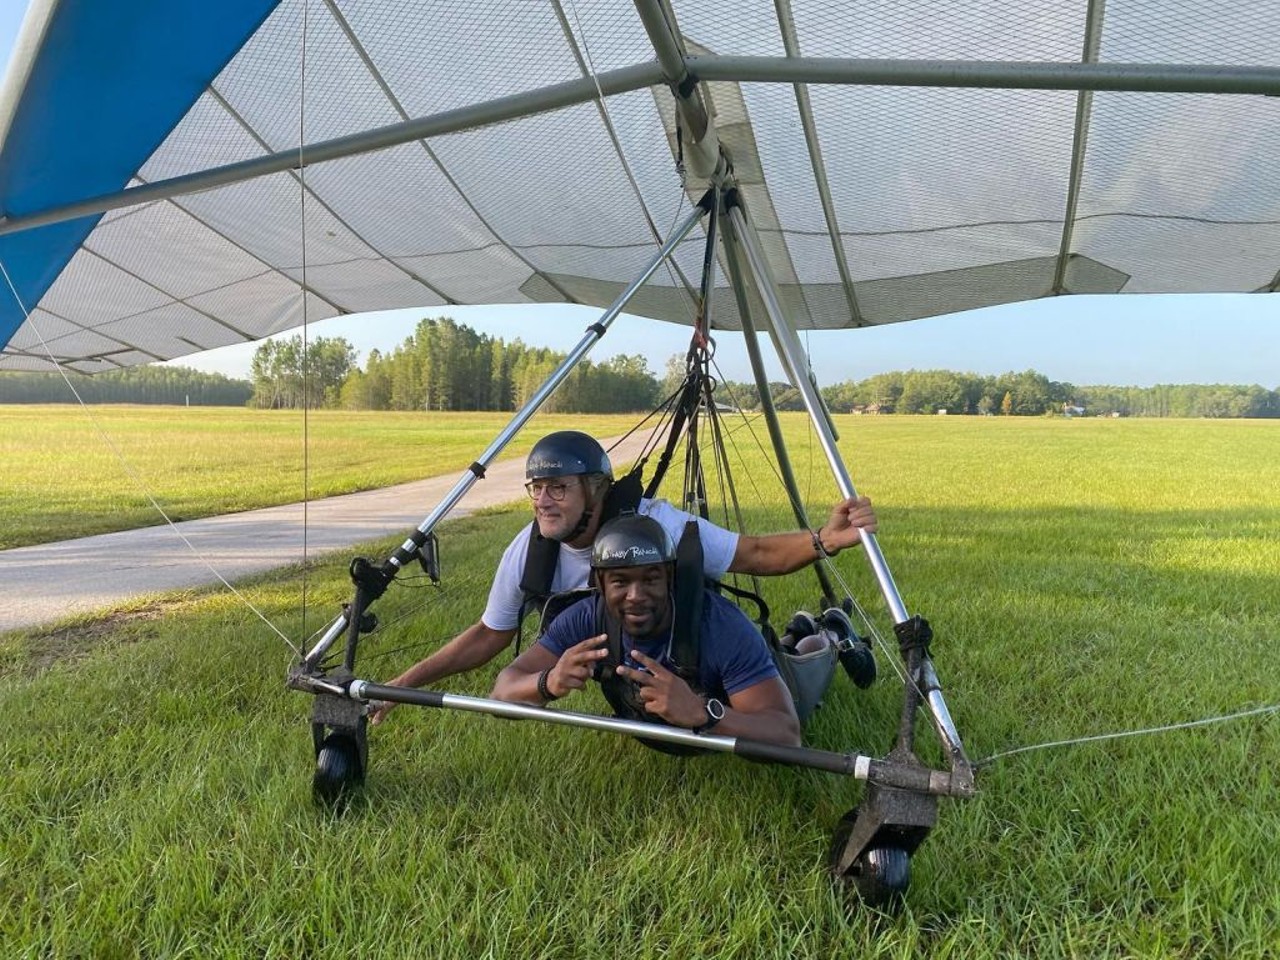 Take them up &#151; way up
No hill, no problem: Wallaby Ranch lays claim to the title of "first fulltime aerotow hang gliding flight park in the world." For the nervous types, tandem flights are also available.
Photo via Wallaby Ranch